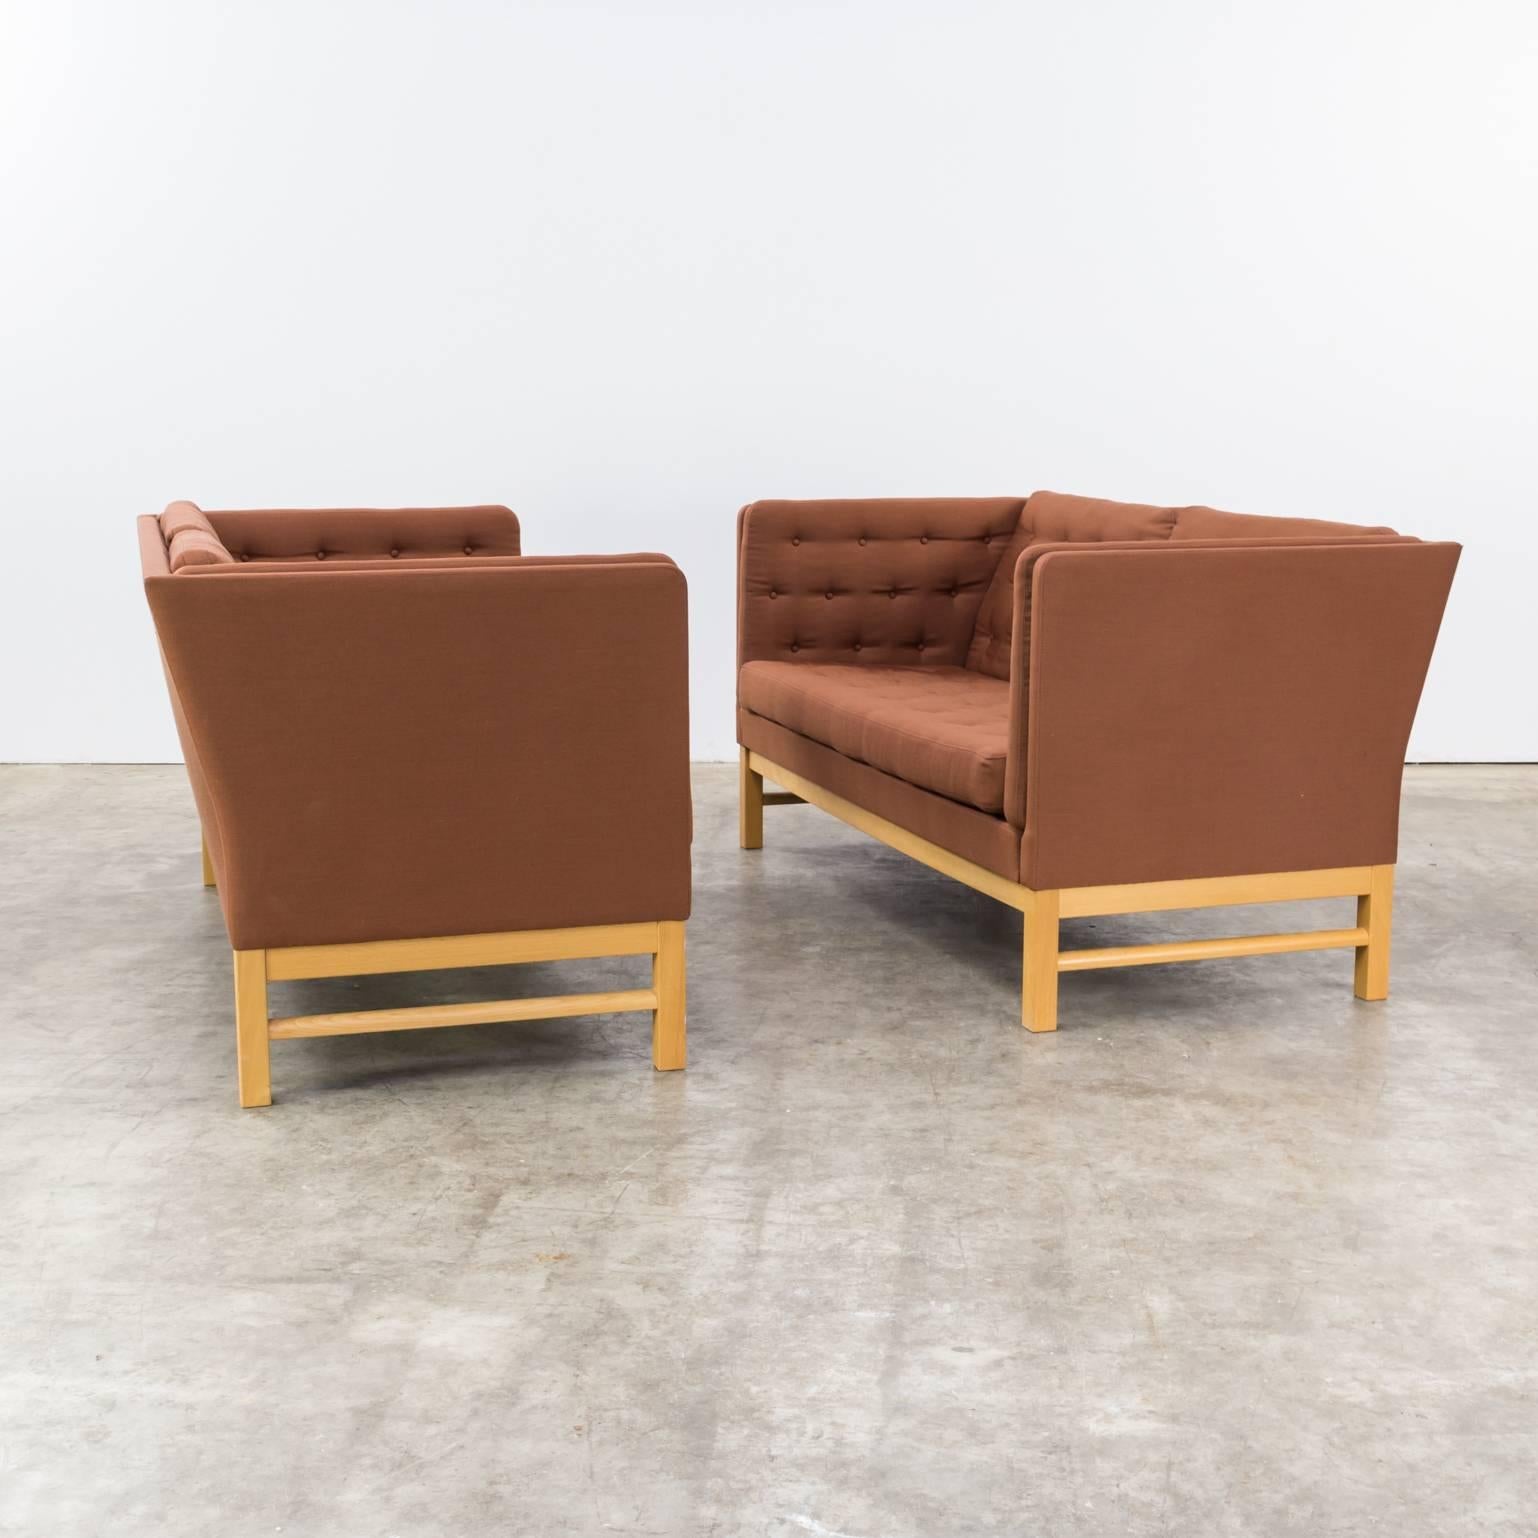 1970s Erik Ole Jørgensen sofa earth color set of two. Good condition, firm frames, fabric minor spurs of usage.